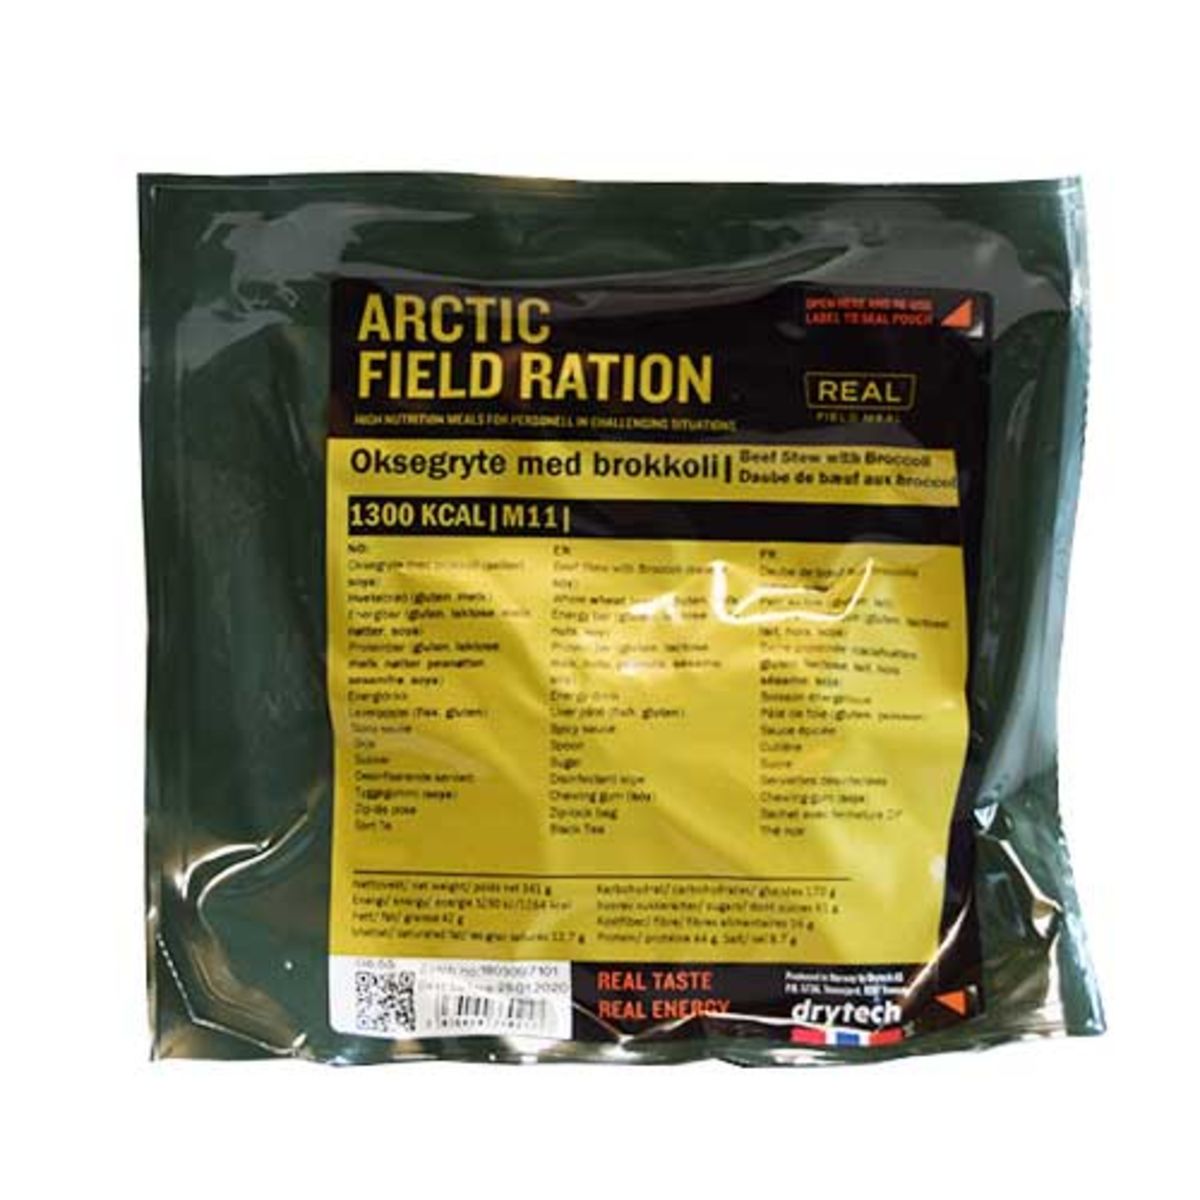 Freeze dried ration - Pulled pork with rice - Arctic Field Ration